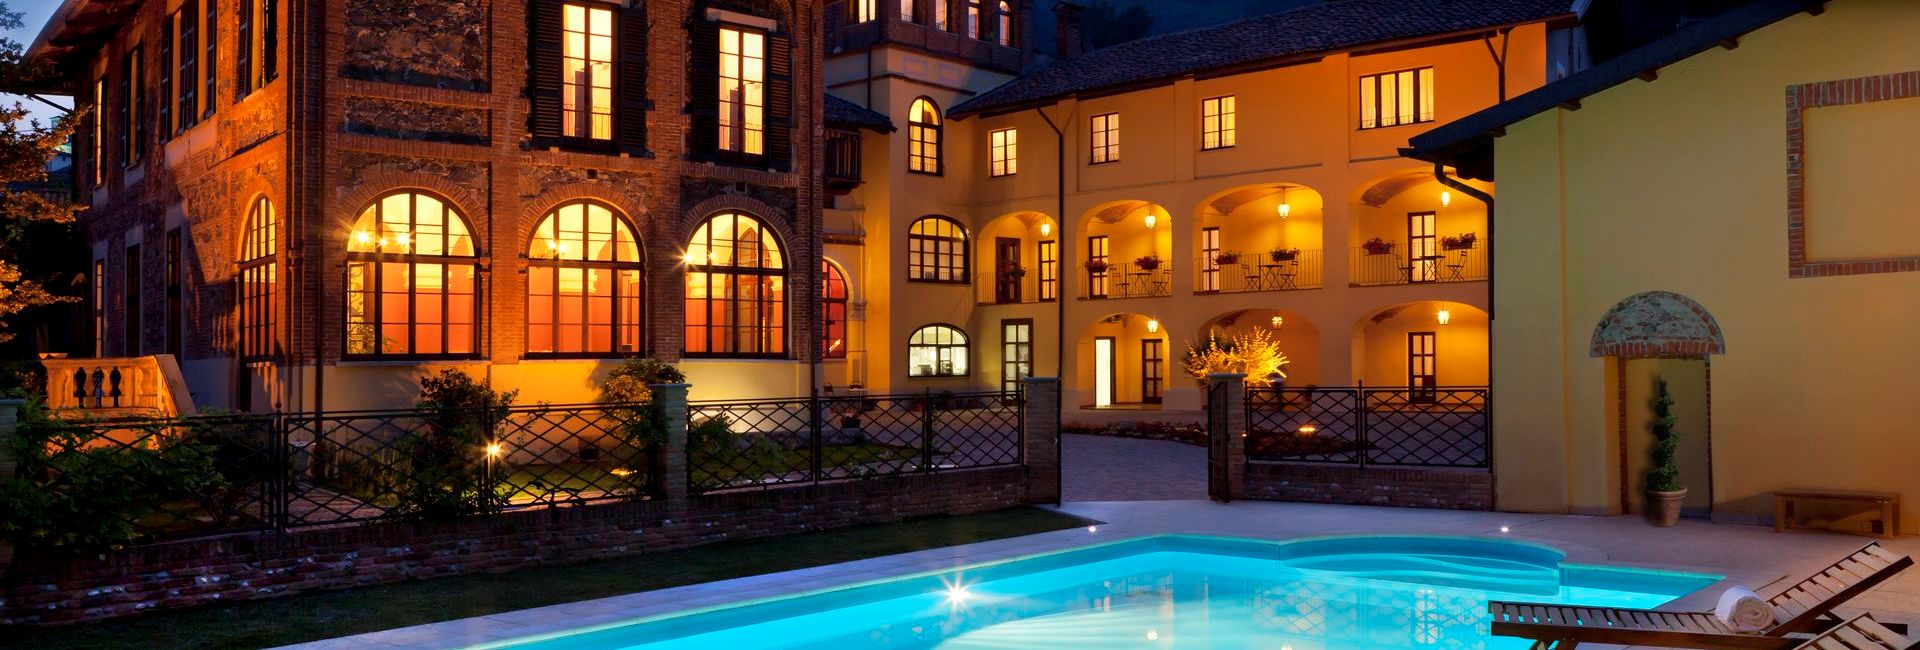 Villa Soleil by night with lightened windows and exterior pool